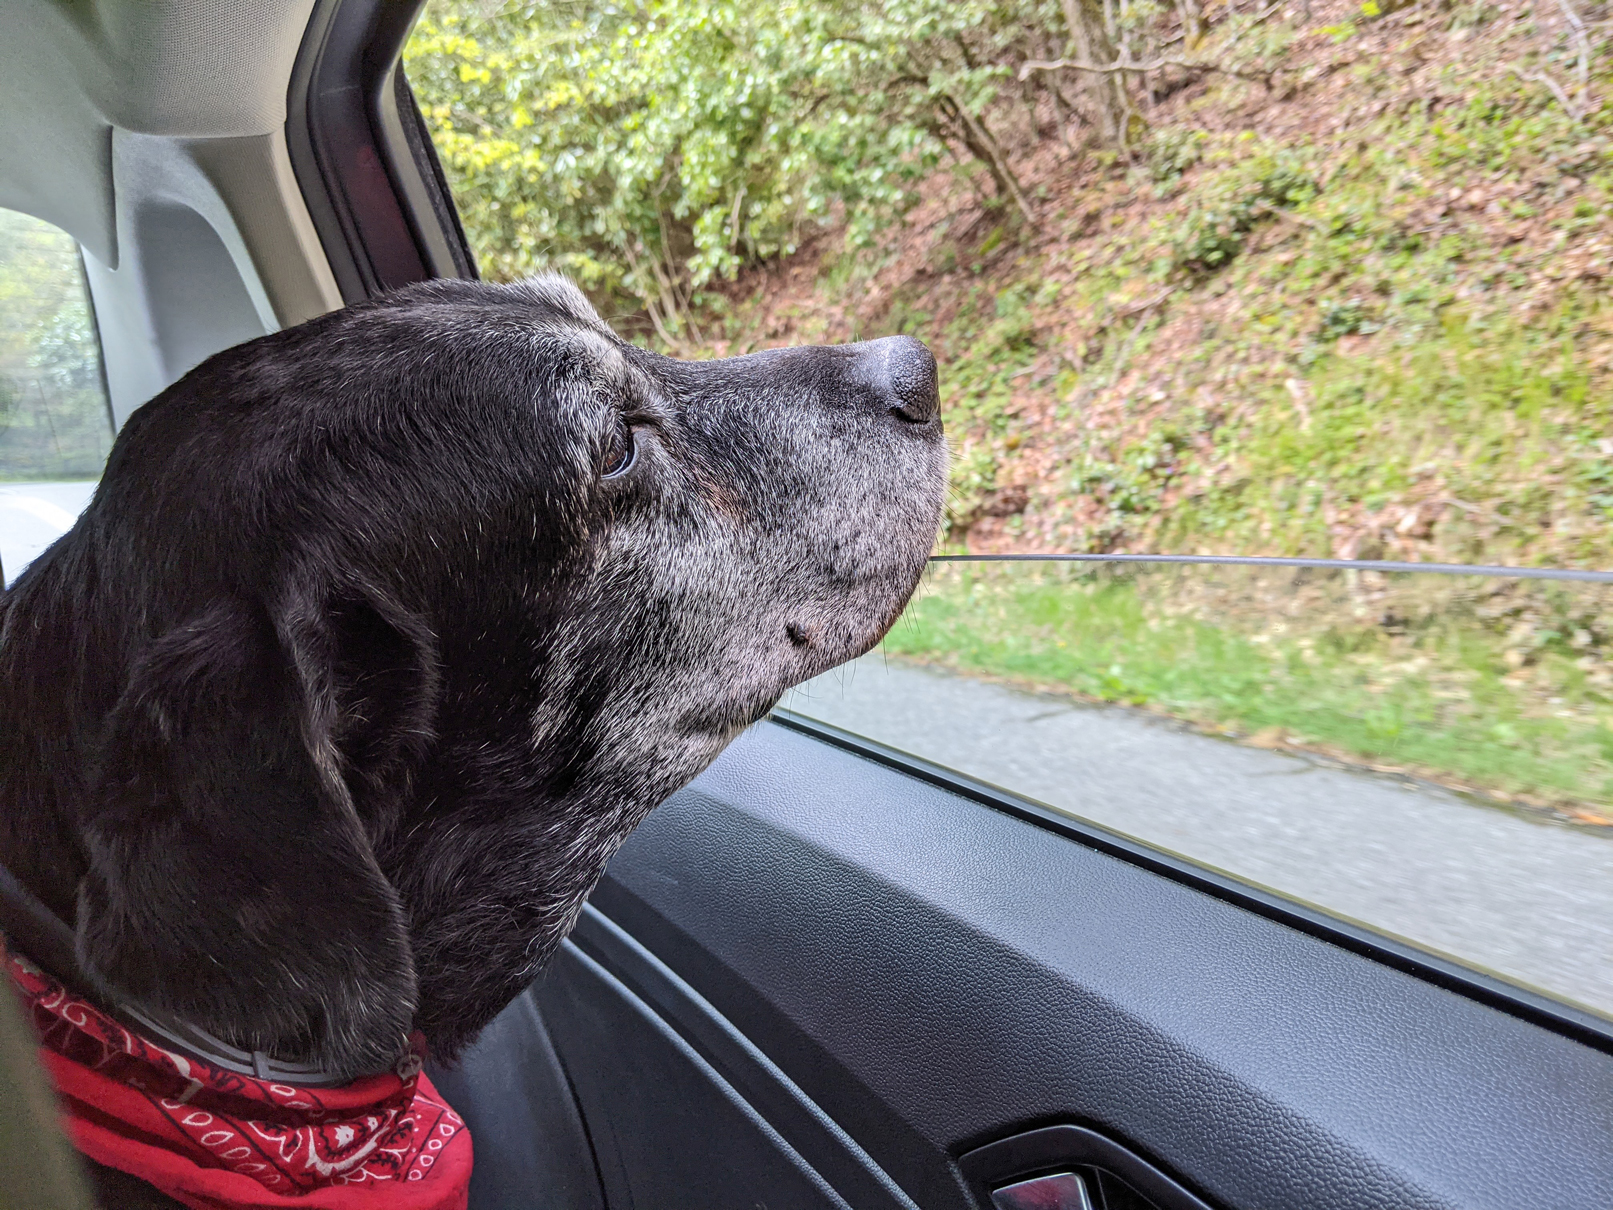 Zeno, the fearless Border Patrol dog, back in mountains of pungent smells, Blue Ridge Parkway (BRP), NC